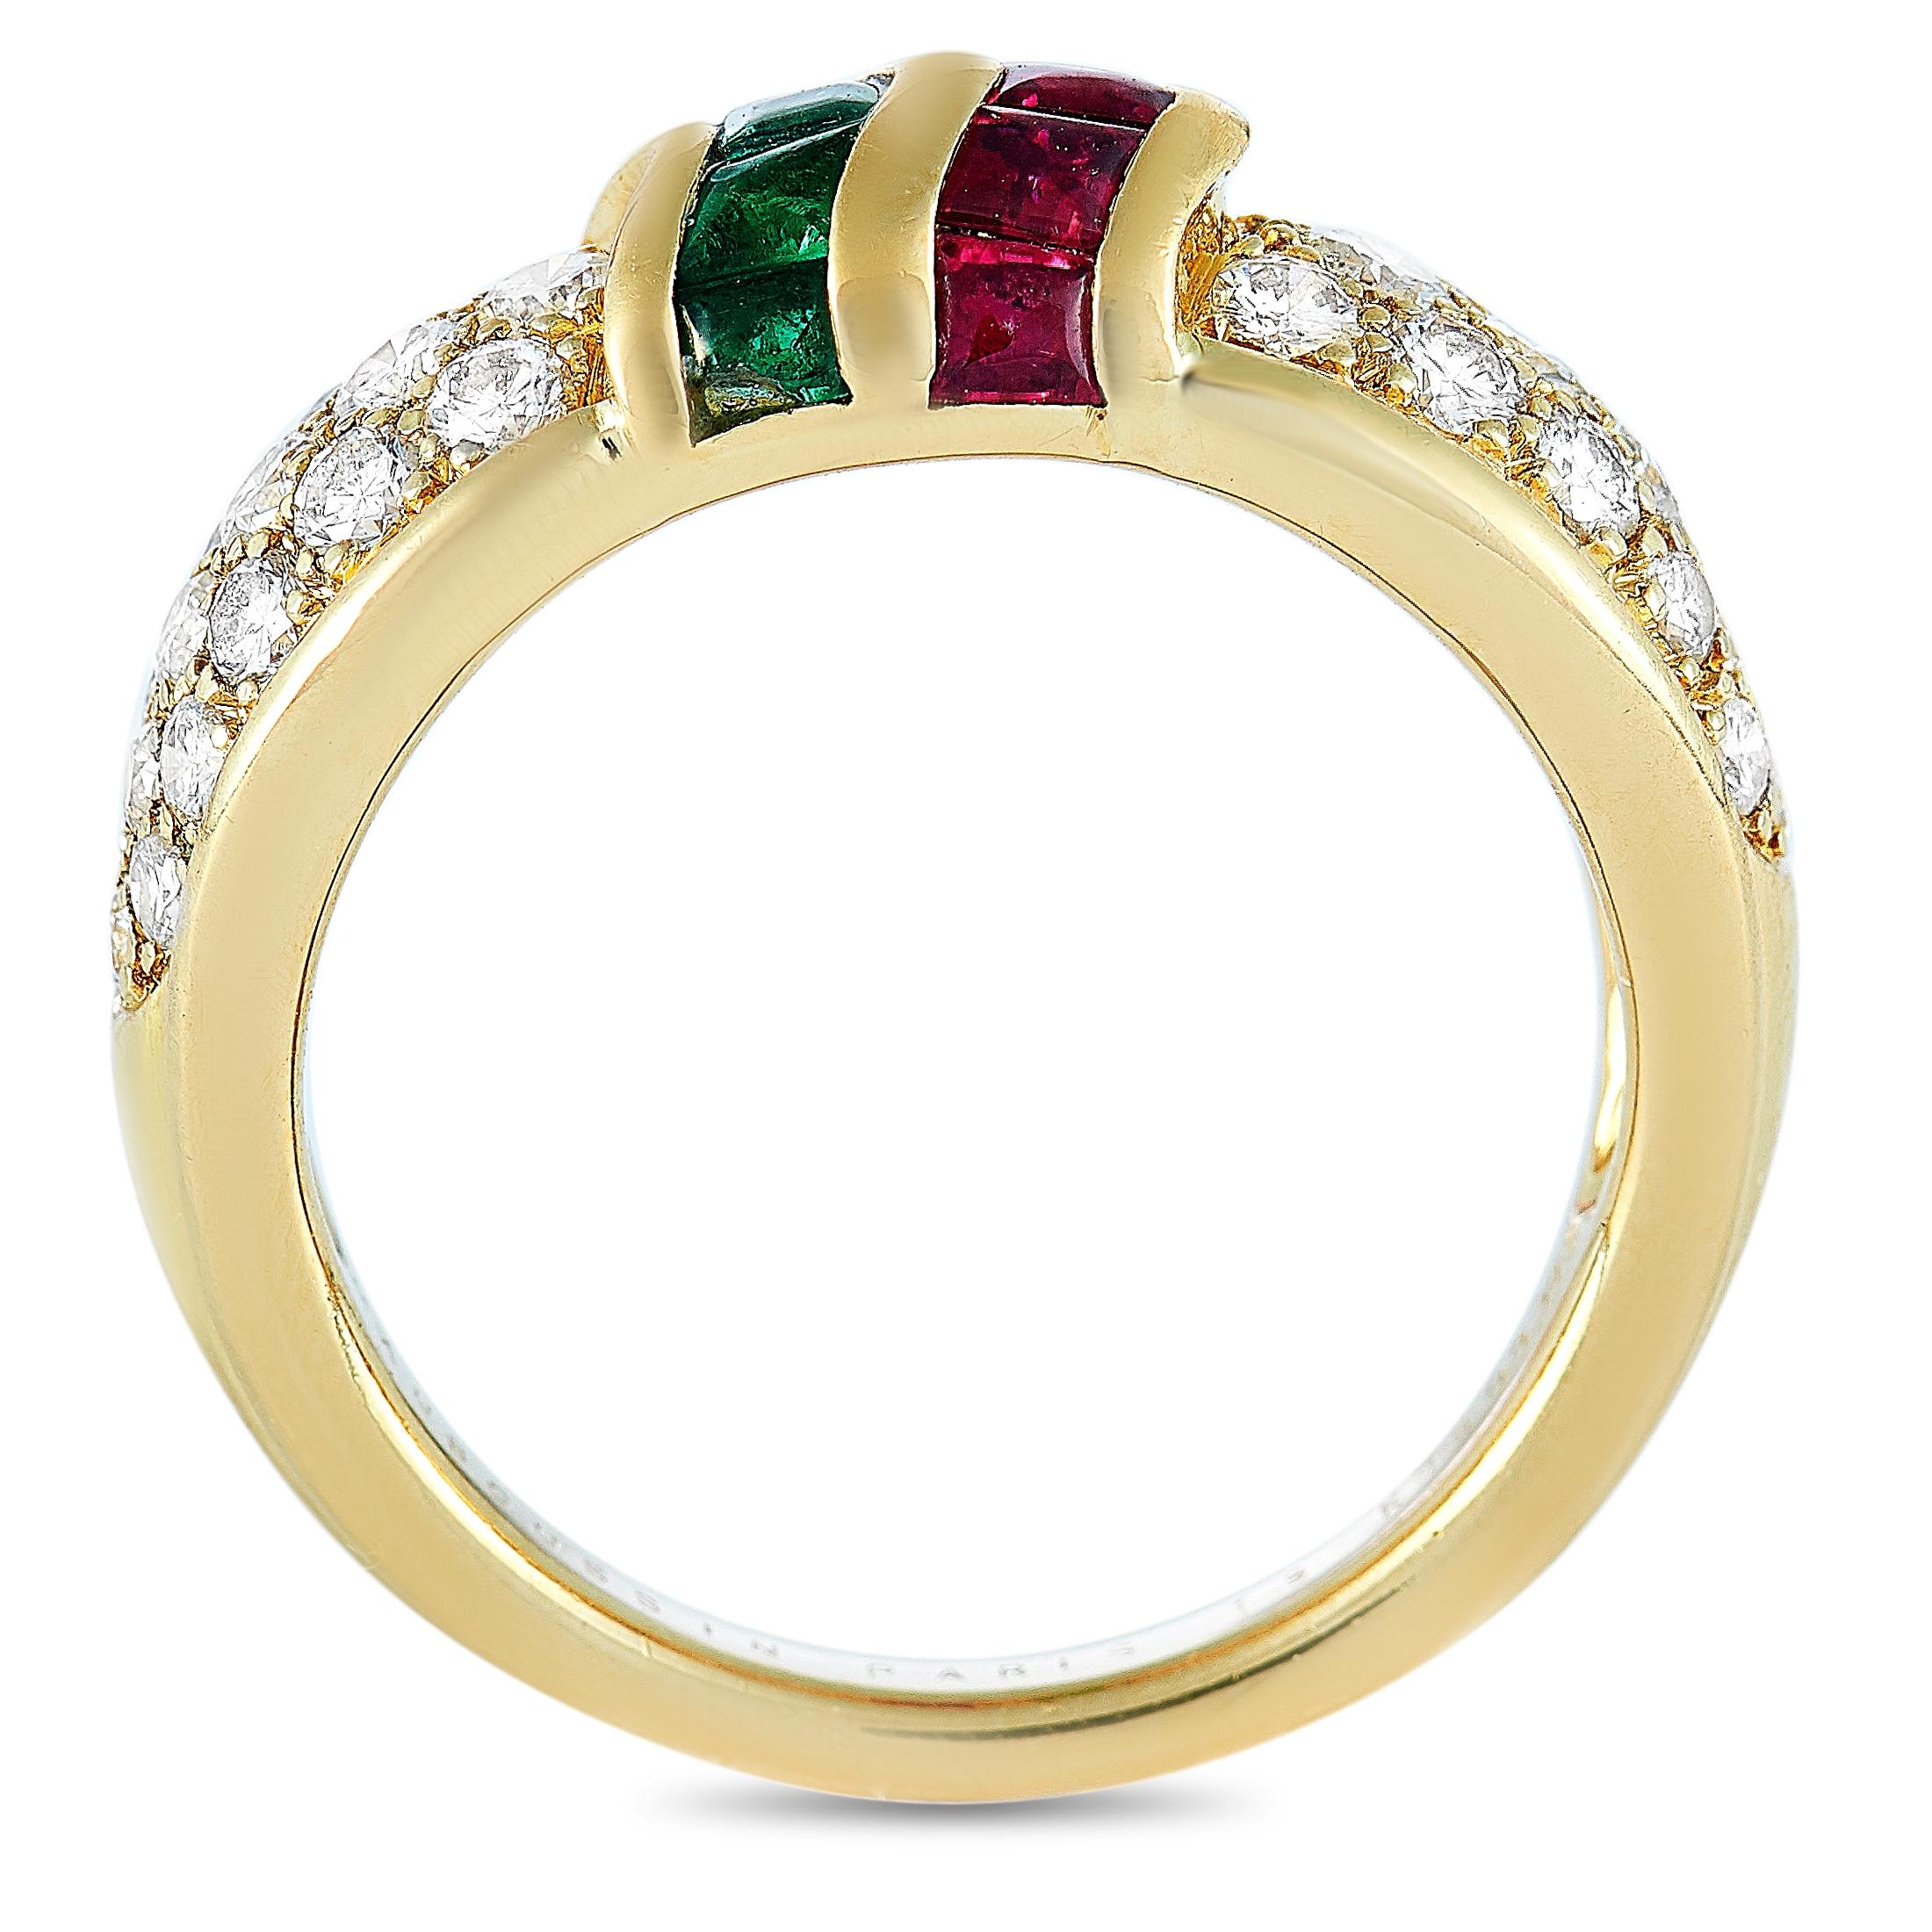 This Mauboussin ring is made of 18K yellow gold and embellished with emeralds, rubies, and a total of 0.45 carats of diamonds. The ring weighs 5.9 grams and boasts band thickness of 3 mm and top height of 4 mm, while top dimensions measure 20 by 7